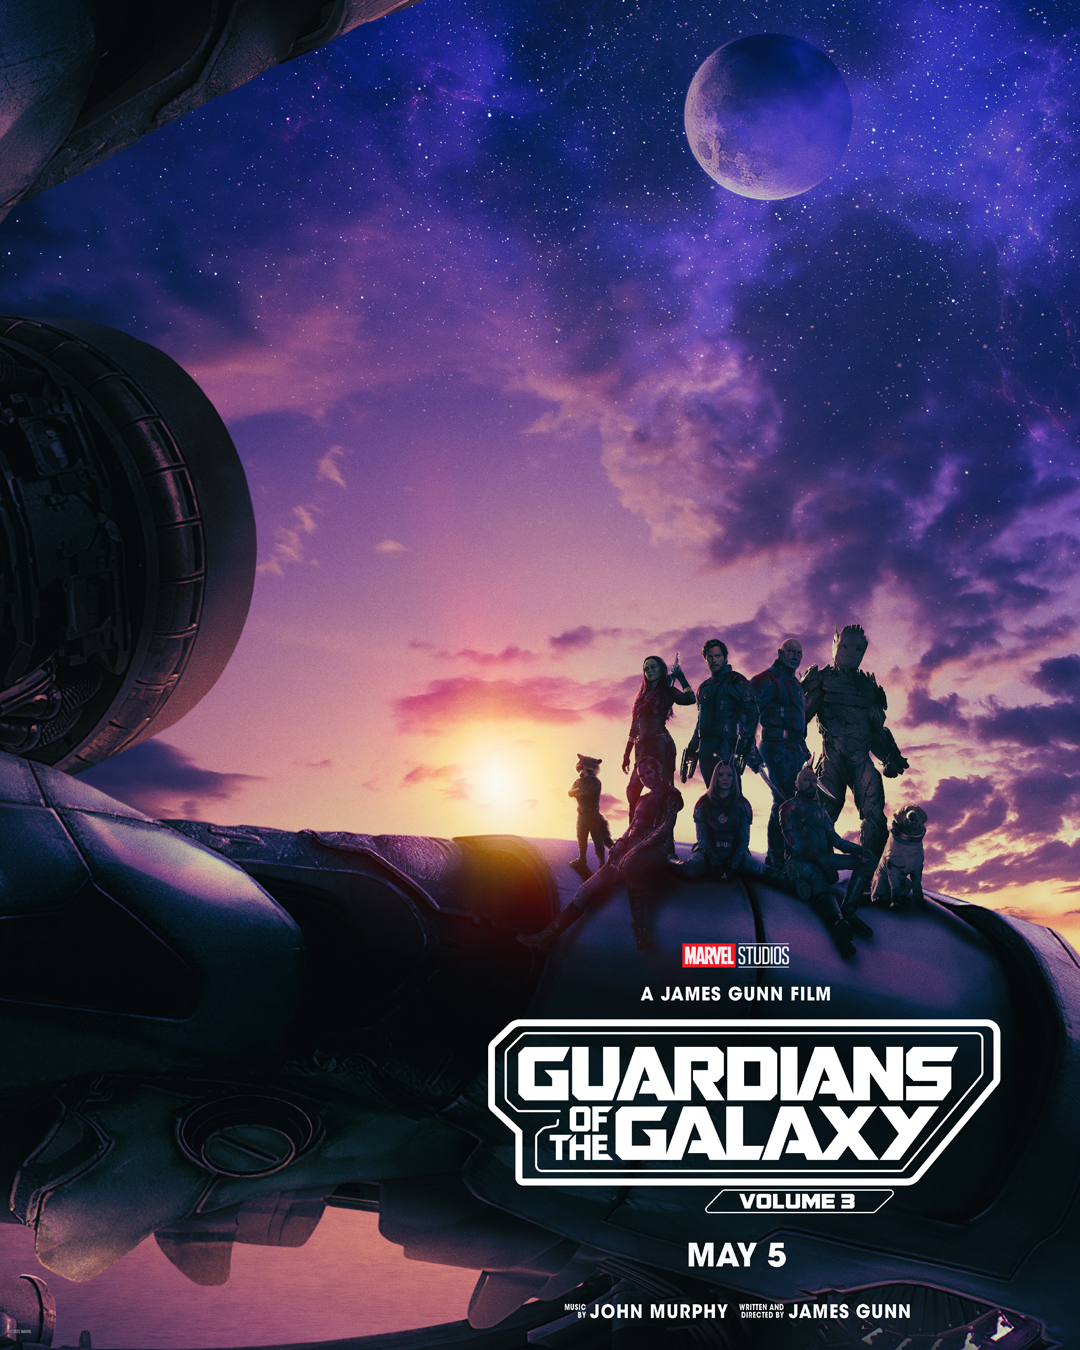 Marvel's new film 'Guardians of the Galaxy Vol. 3' released its first official trailer and poster! | FMV6